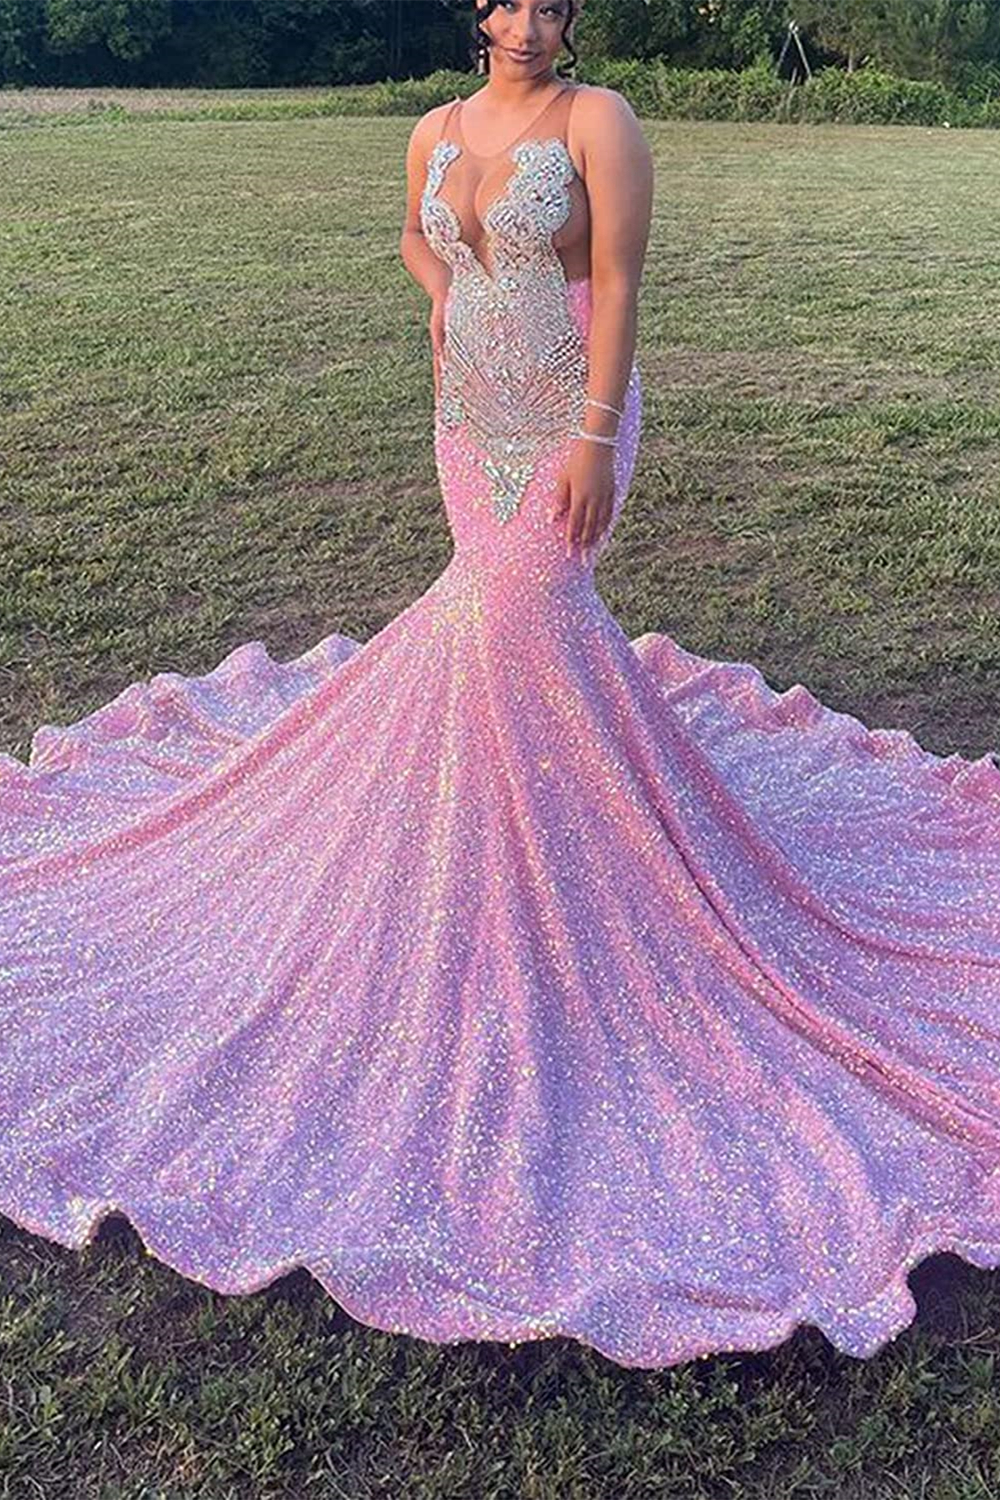 Luluslly Pink Sequins Prom Dress Mermaid Sleeveless With Crystal